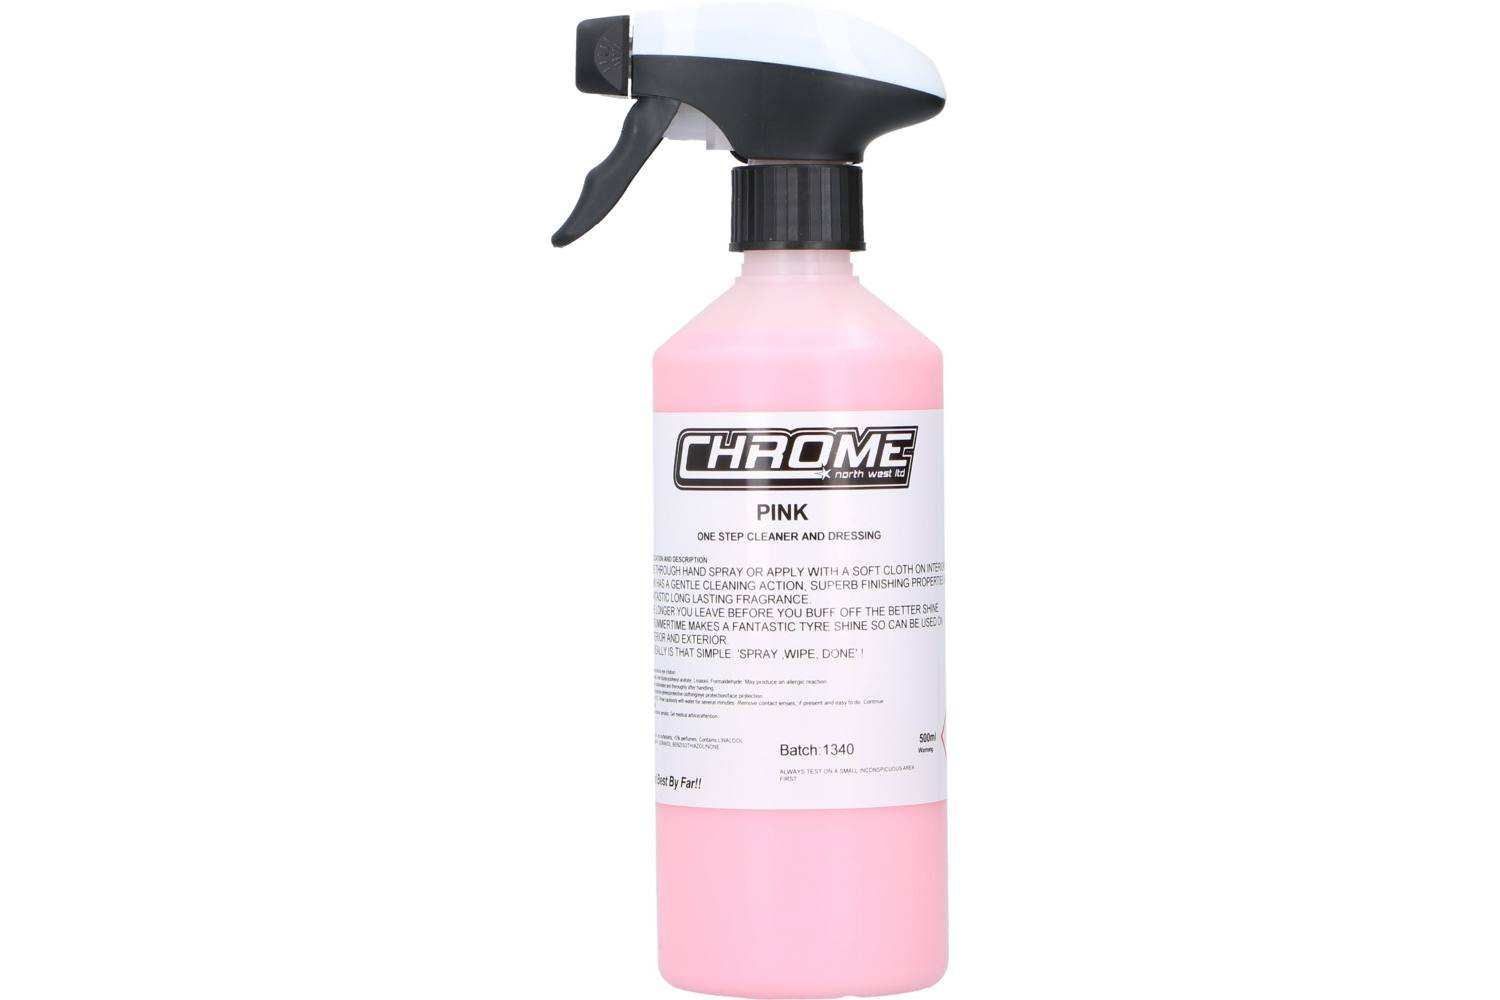 Detergent, Chrome, pink one step cleaner and dressing, 500ml 2